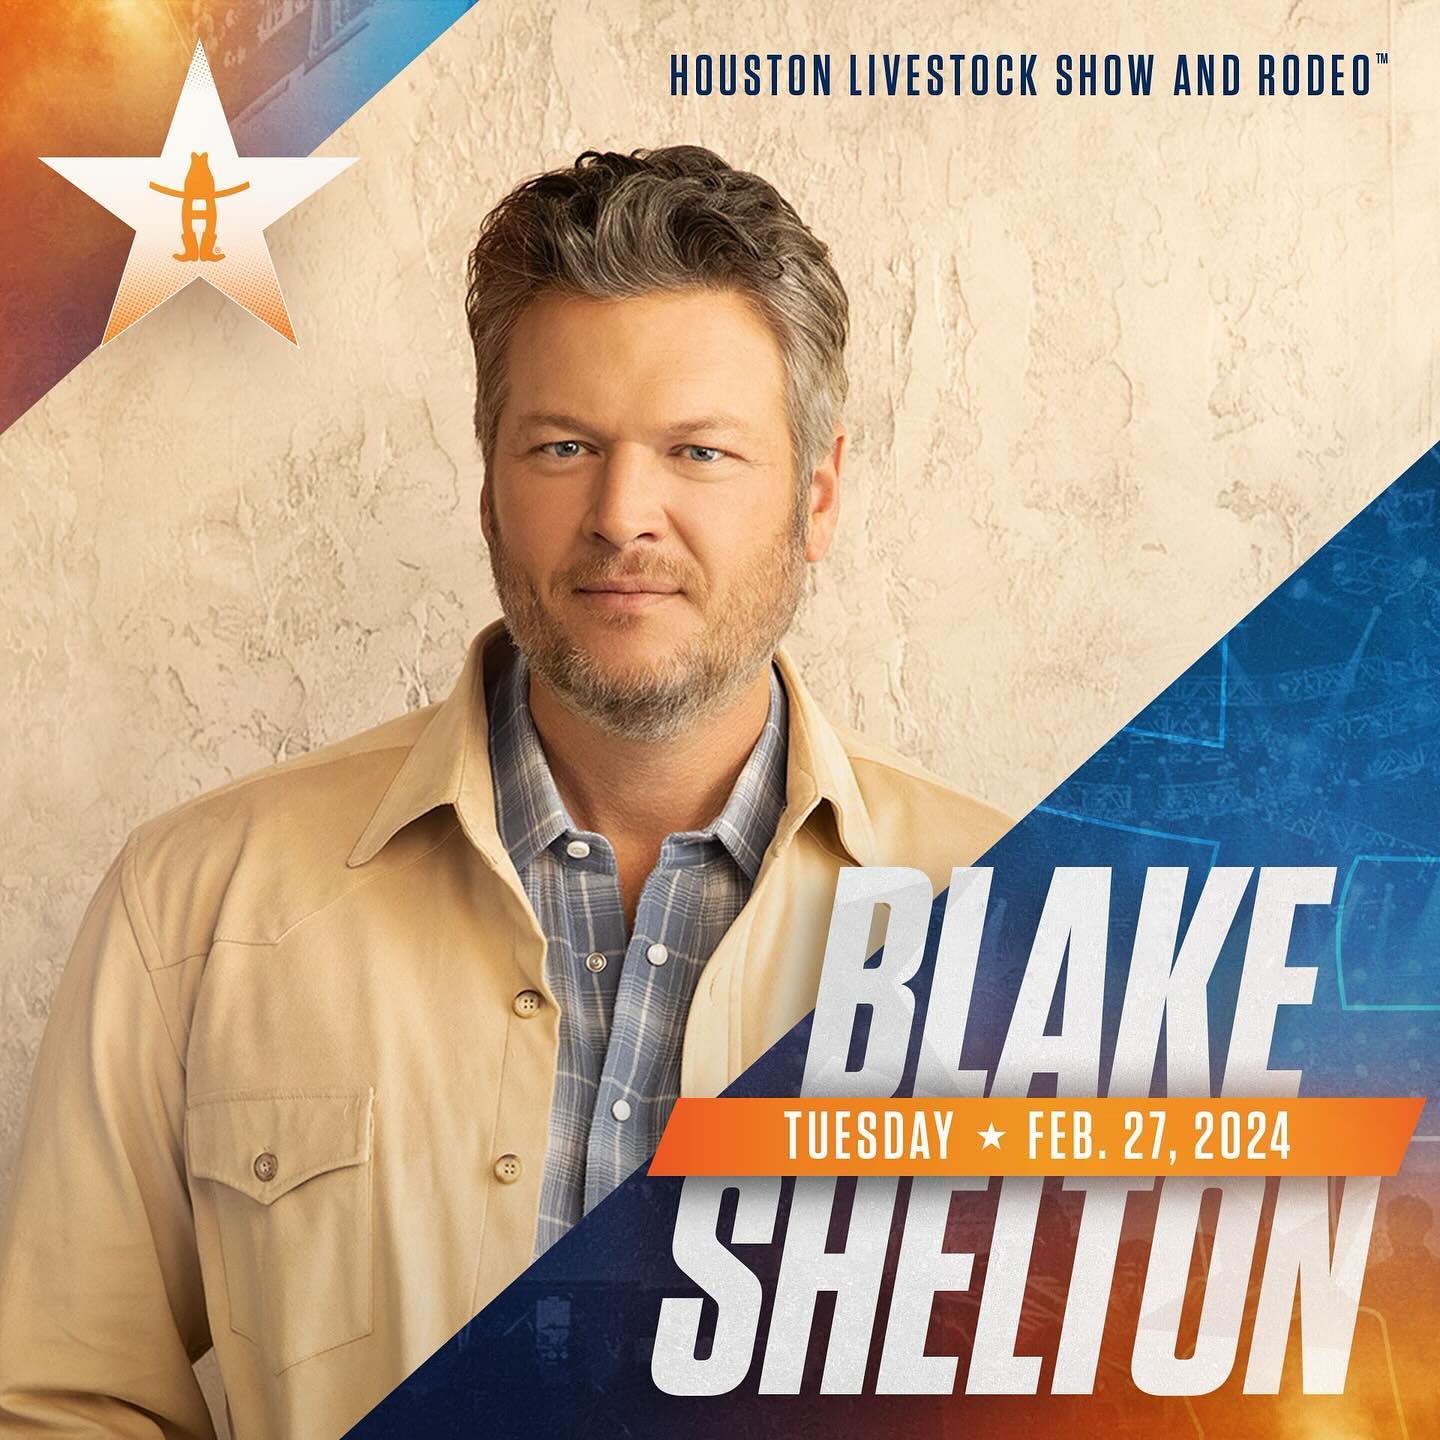 Blake recently promoted the rodeo show that he would be performing at in Houston, Texas, next month